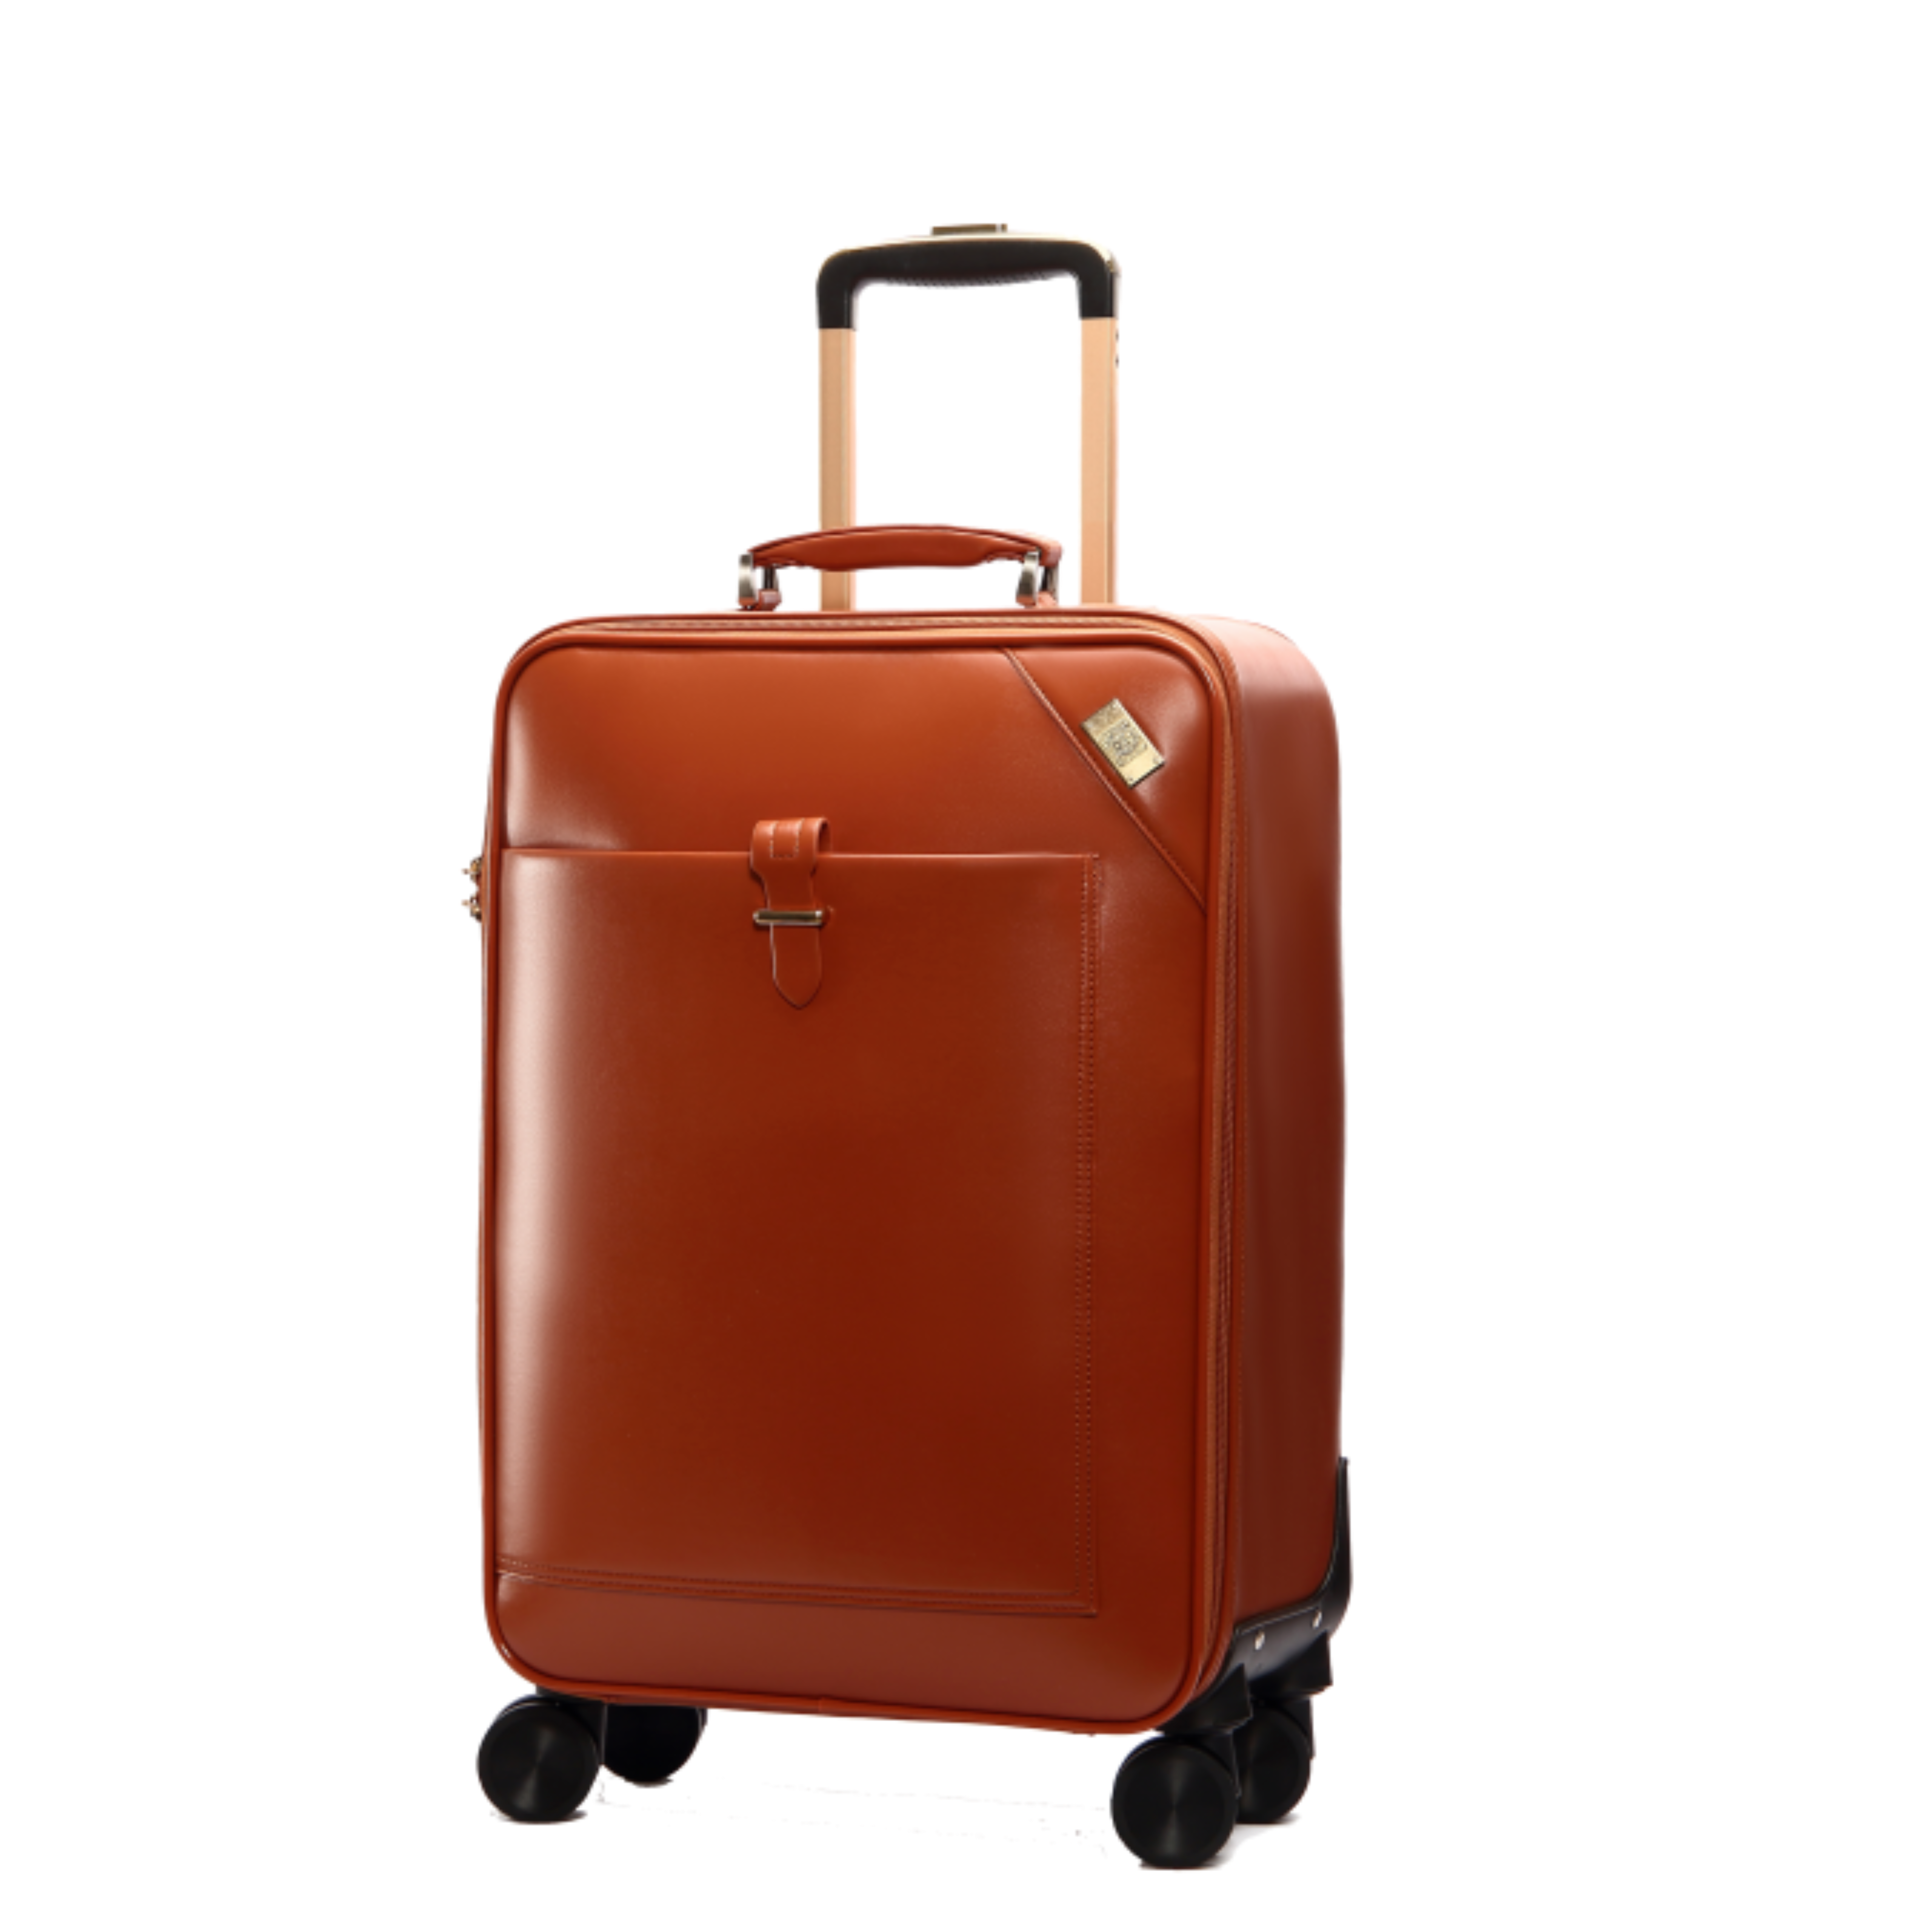 SEMMS LIGHT BROWN LUXURIOUS LEATHER LUGGAGE